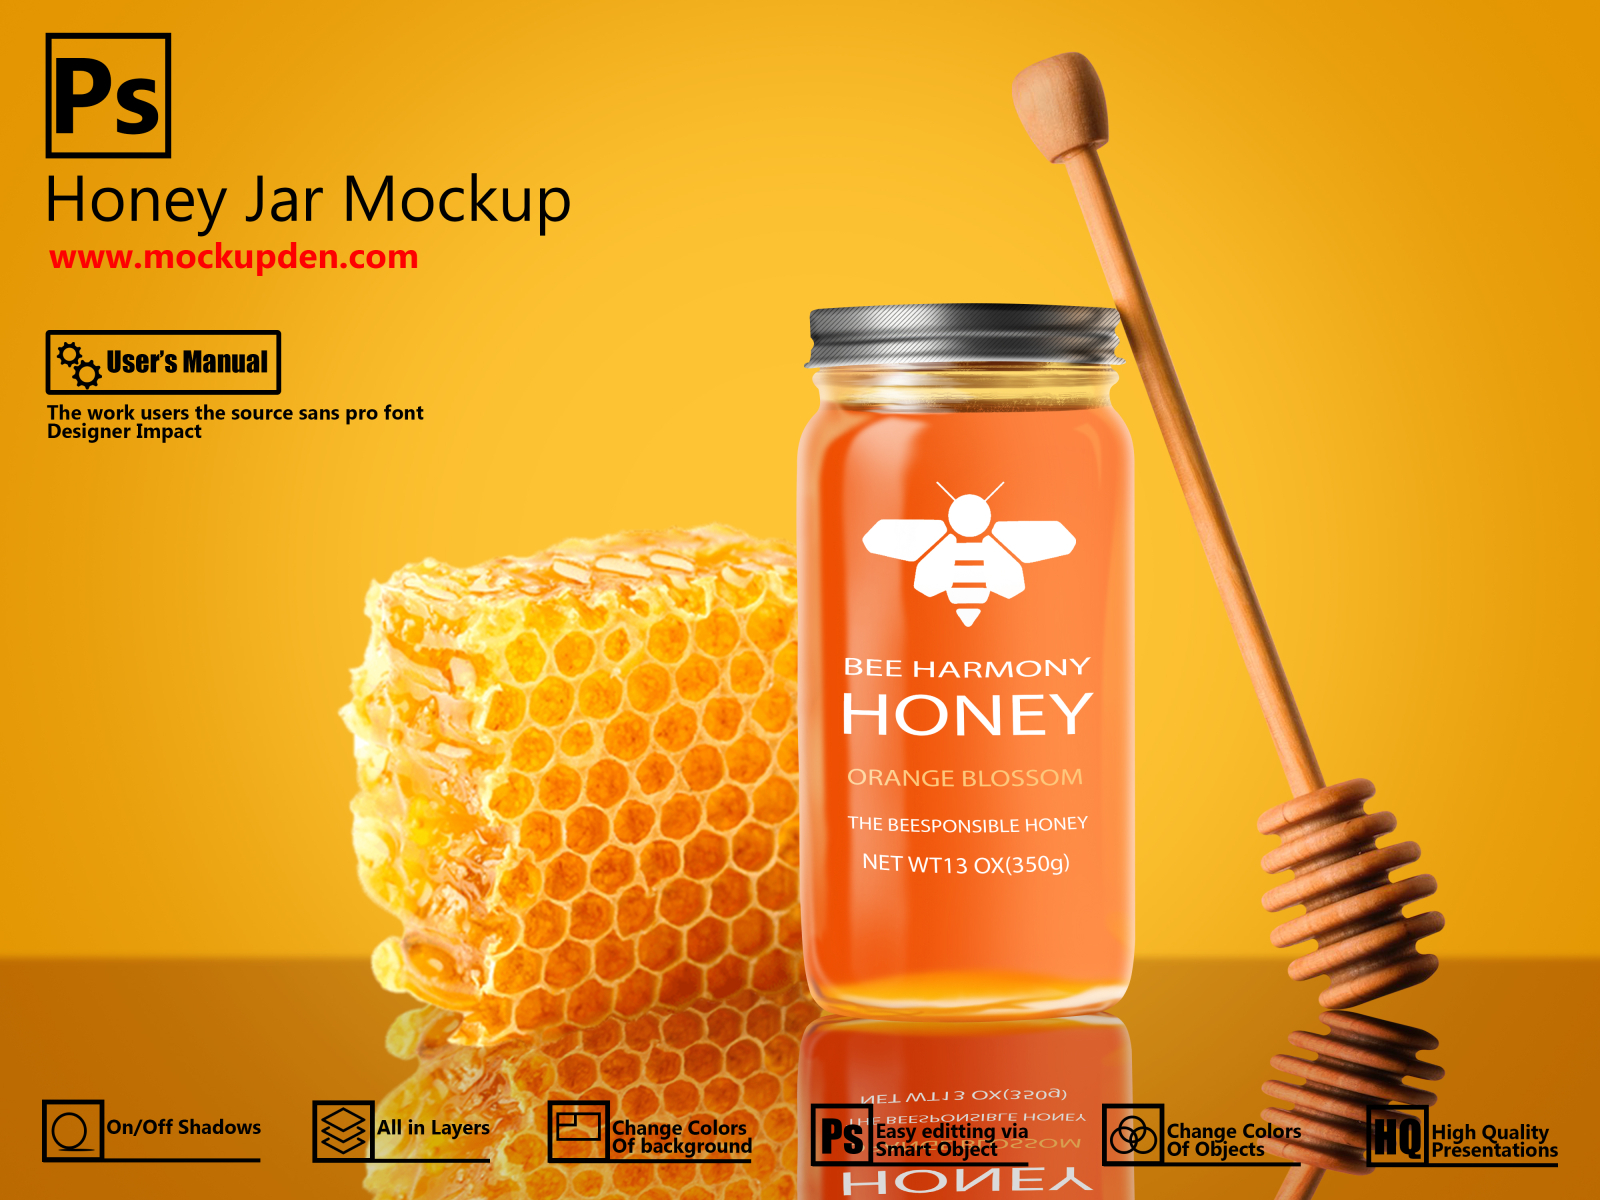 Download Free Attractive Honey Jar Mockup | PSD Template by Mockup Den on Dribbble